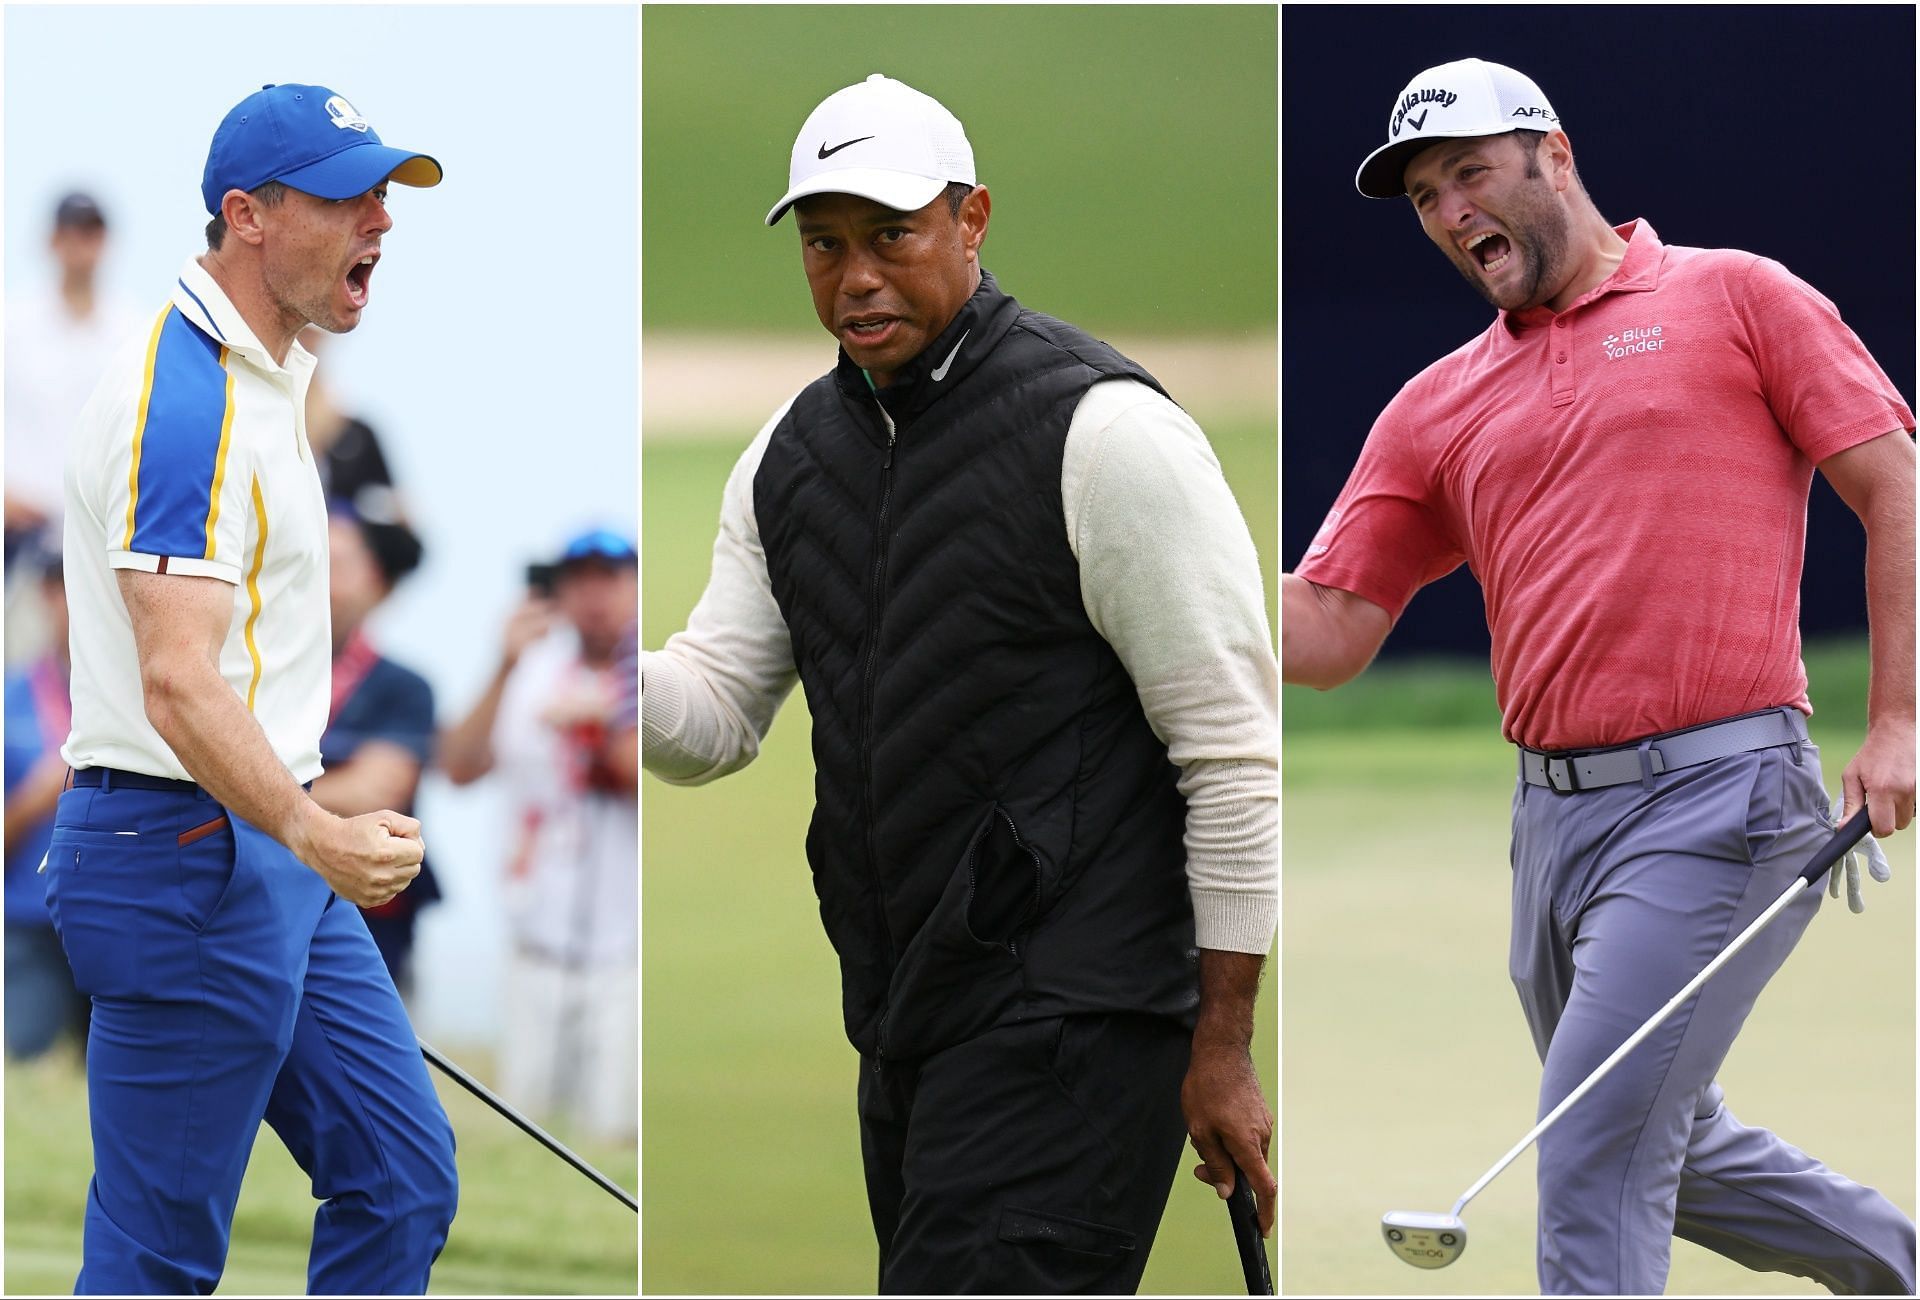 Rory McIlroy, Tiger Woods, and Jon Rahm (via Getty Images)